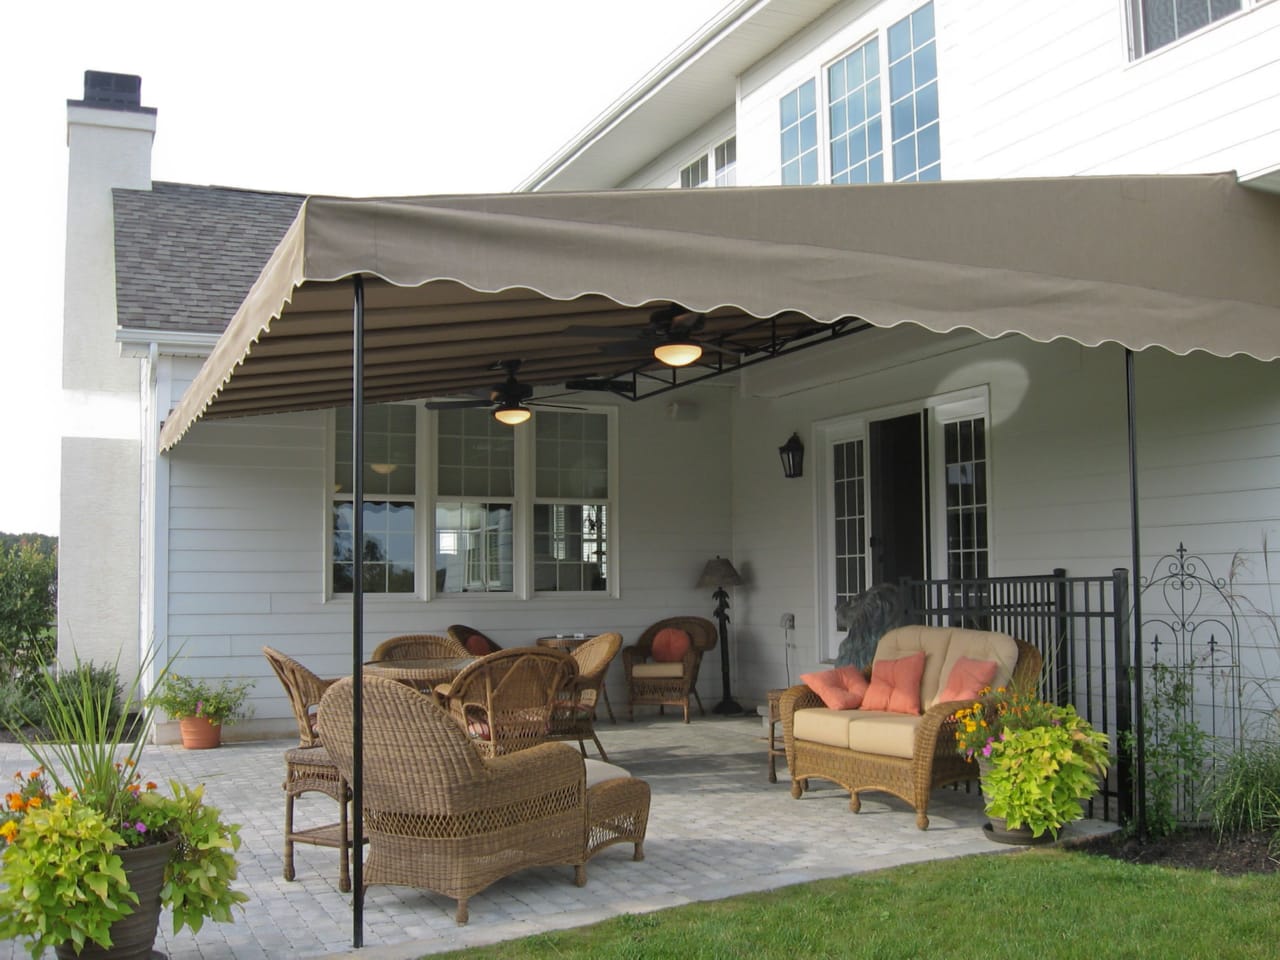 How to build an awning over a patio